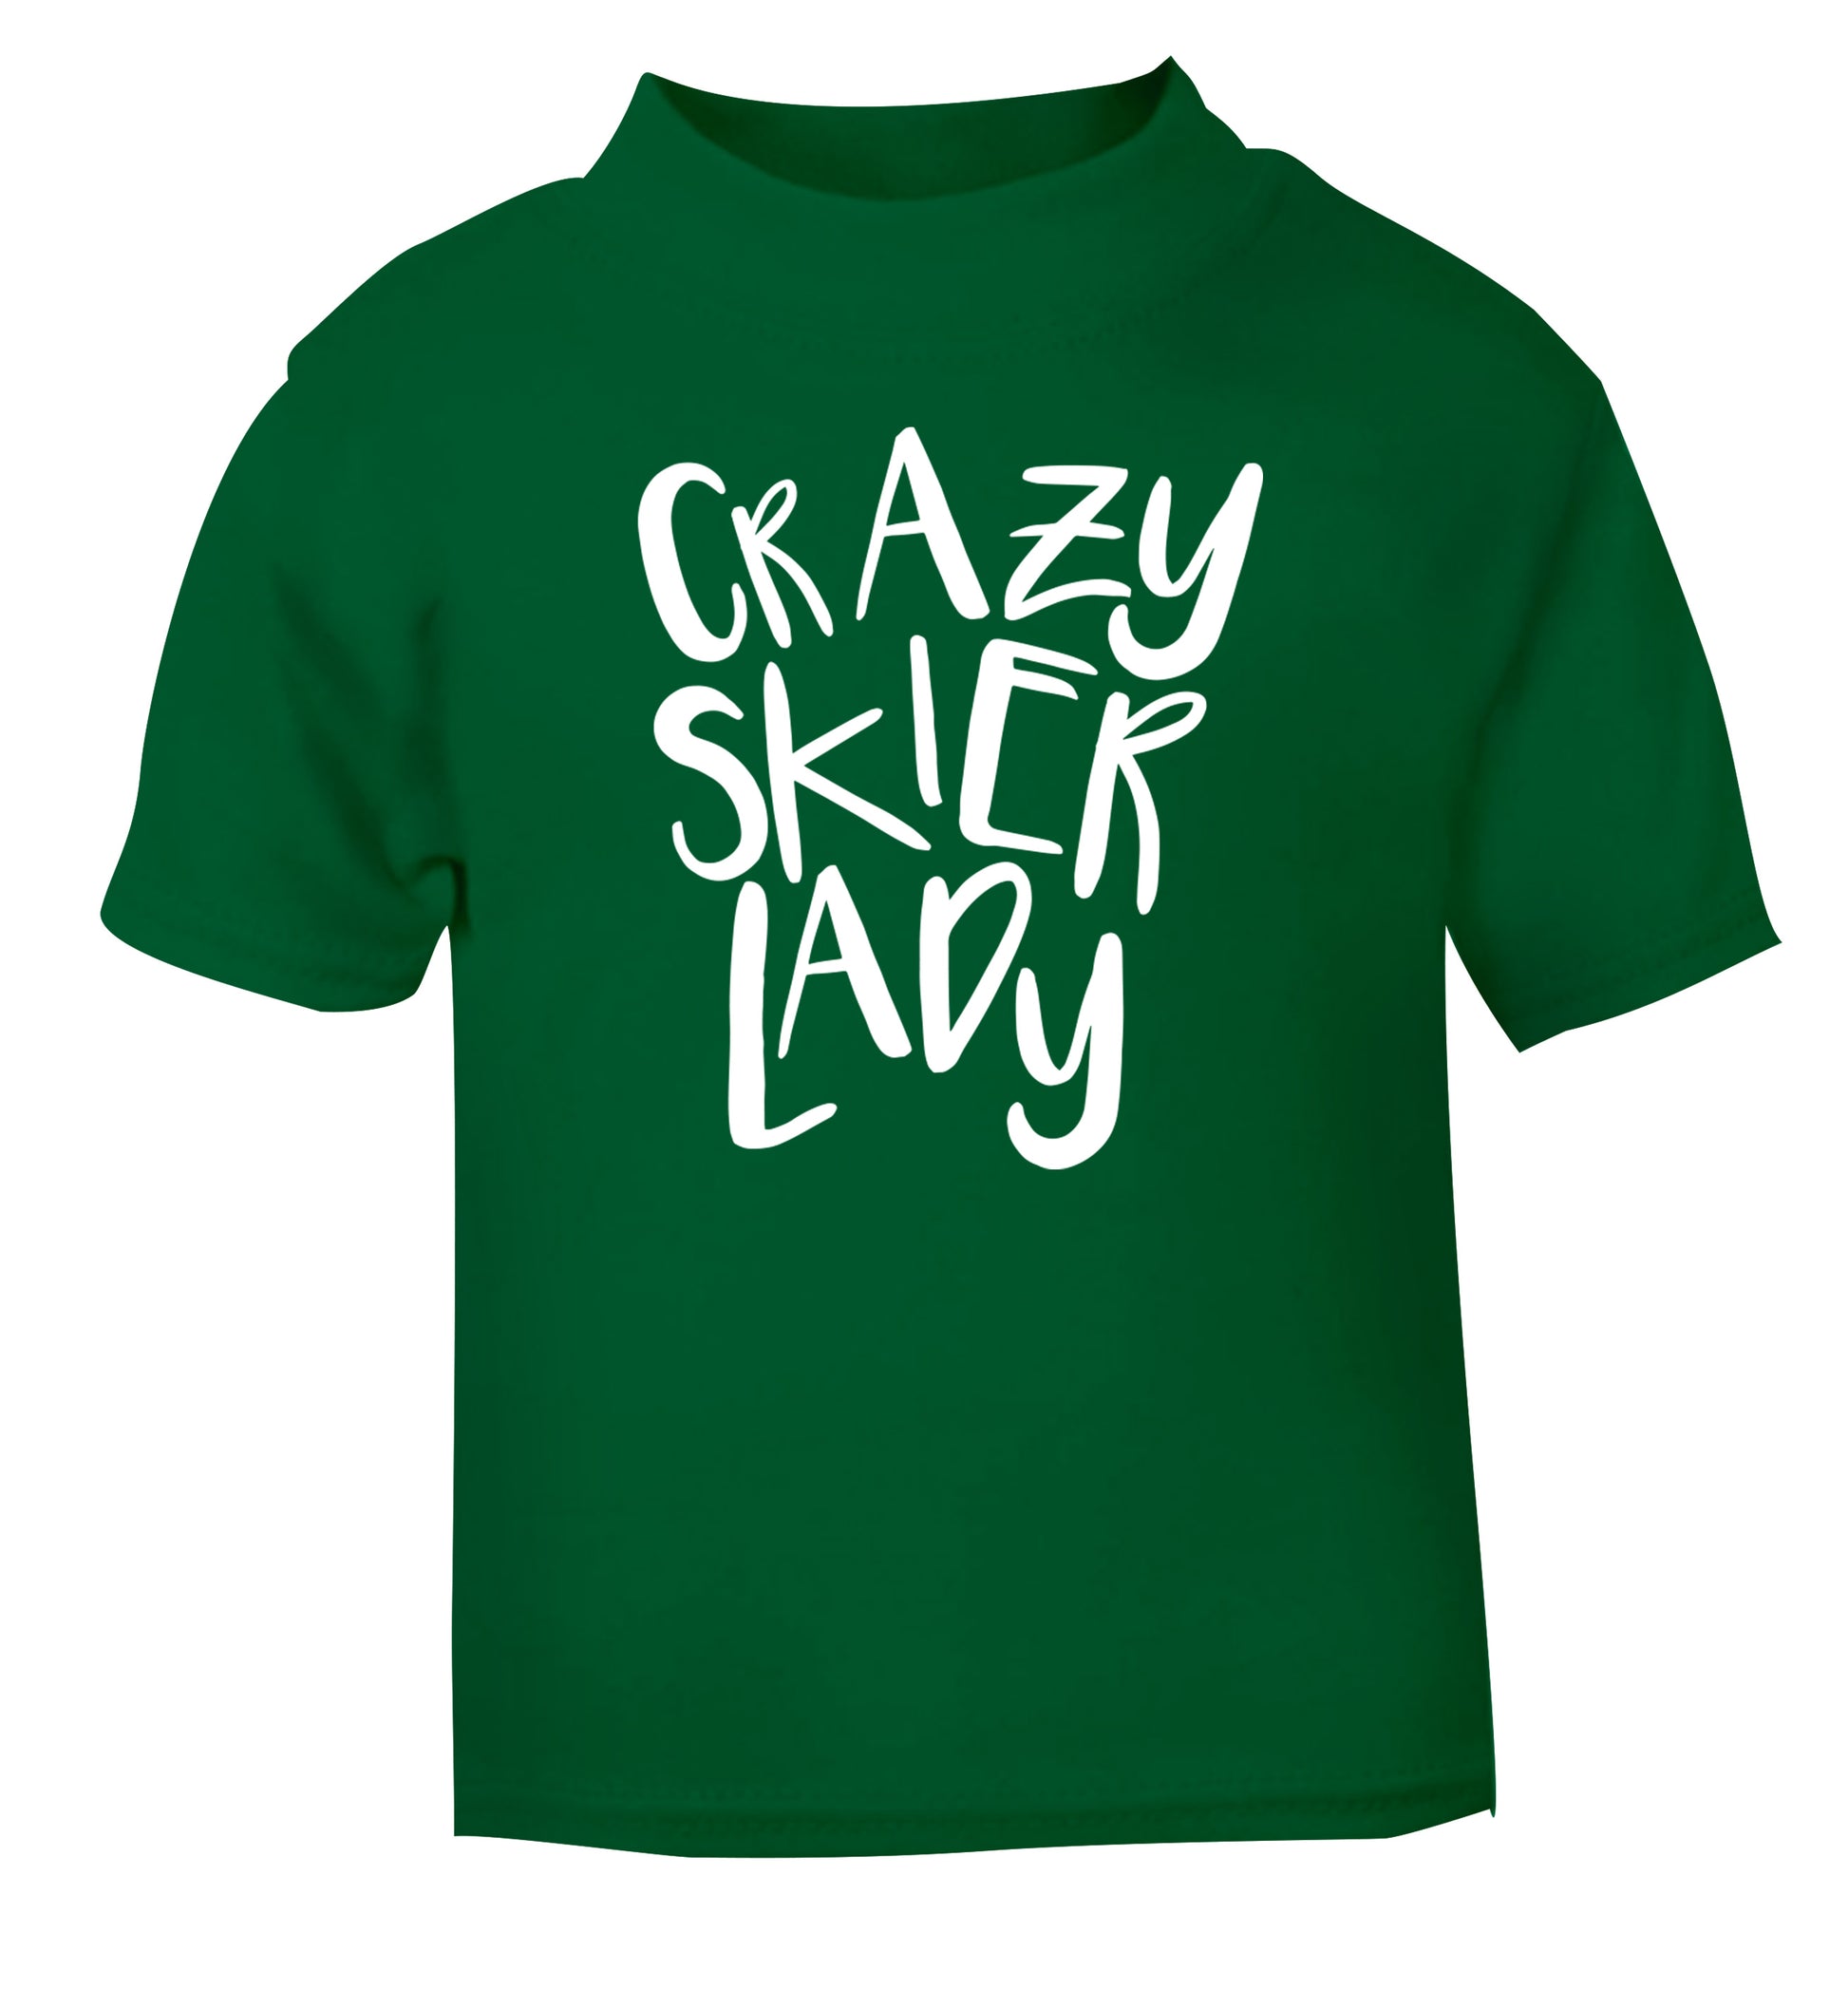 Crazy skier lady green Baby Toddler Tshirt 2 Years